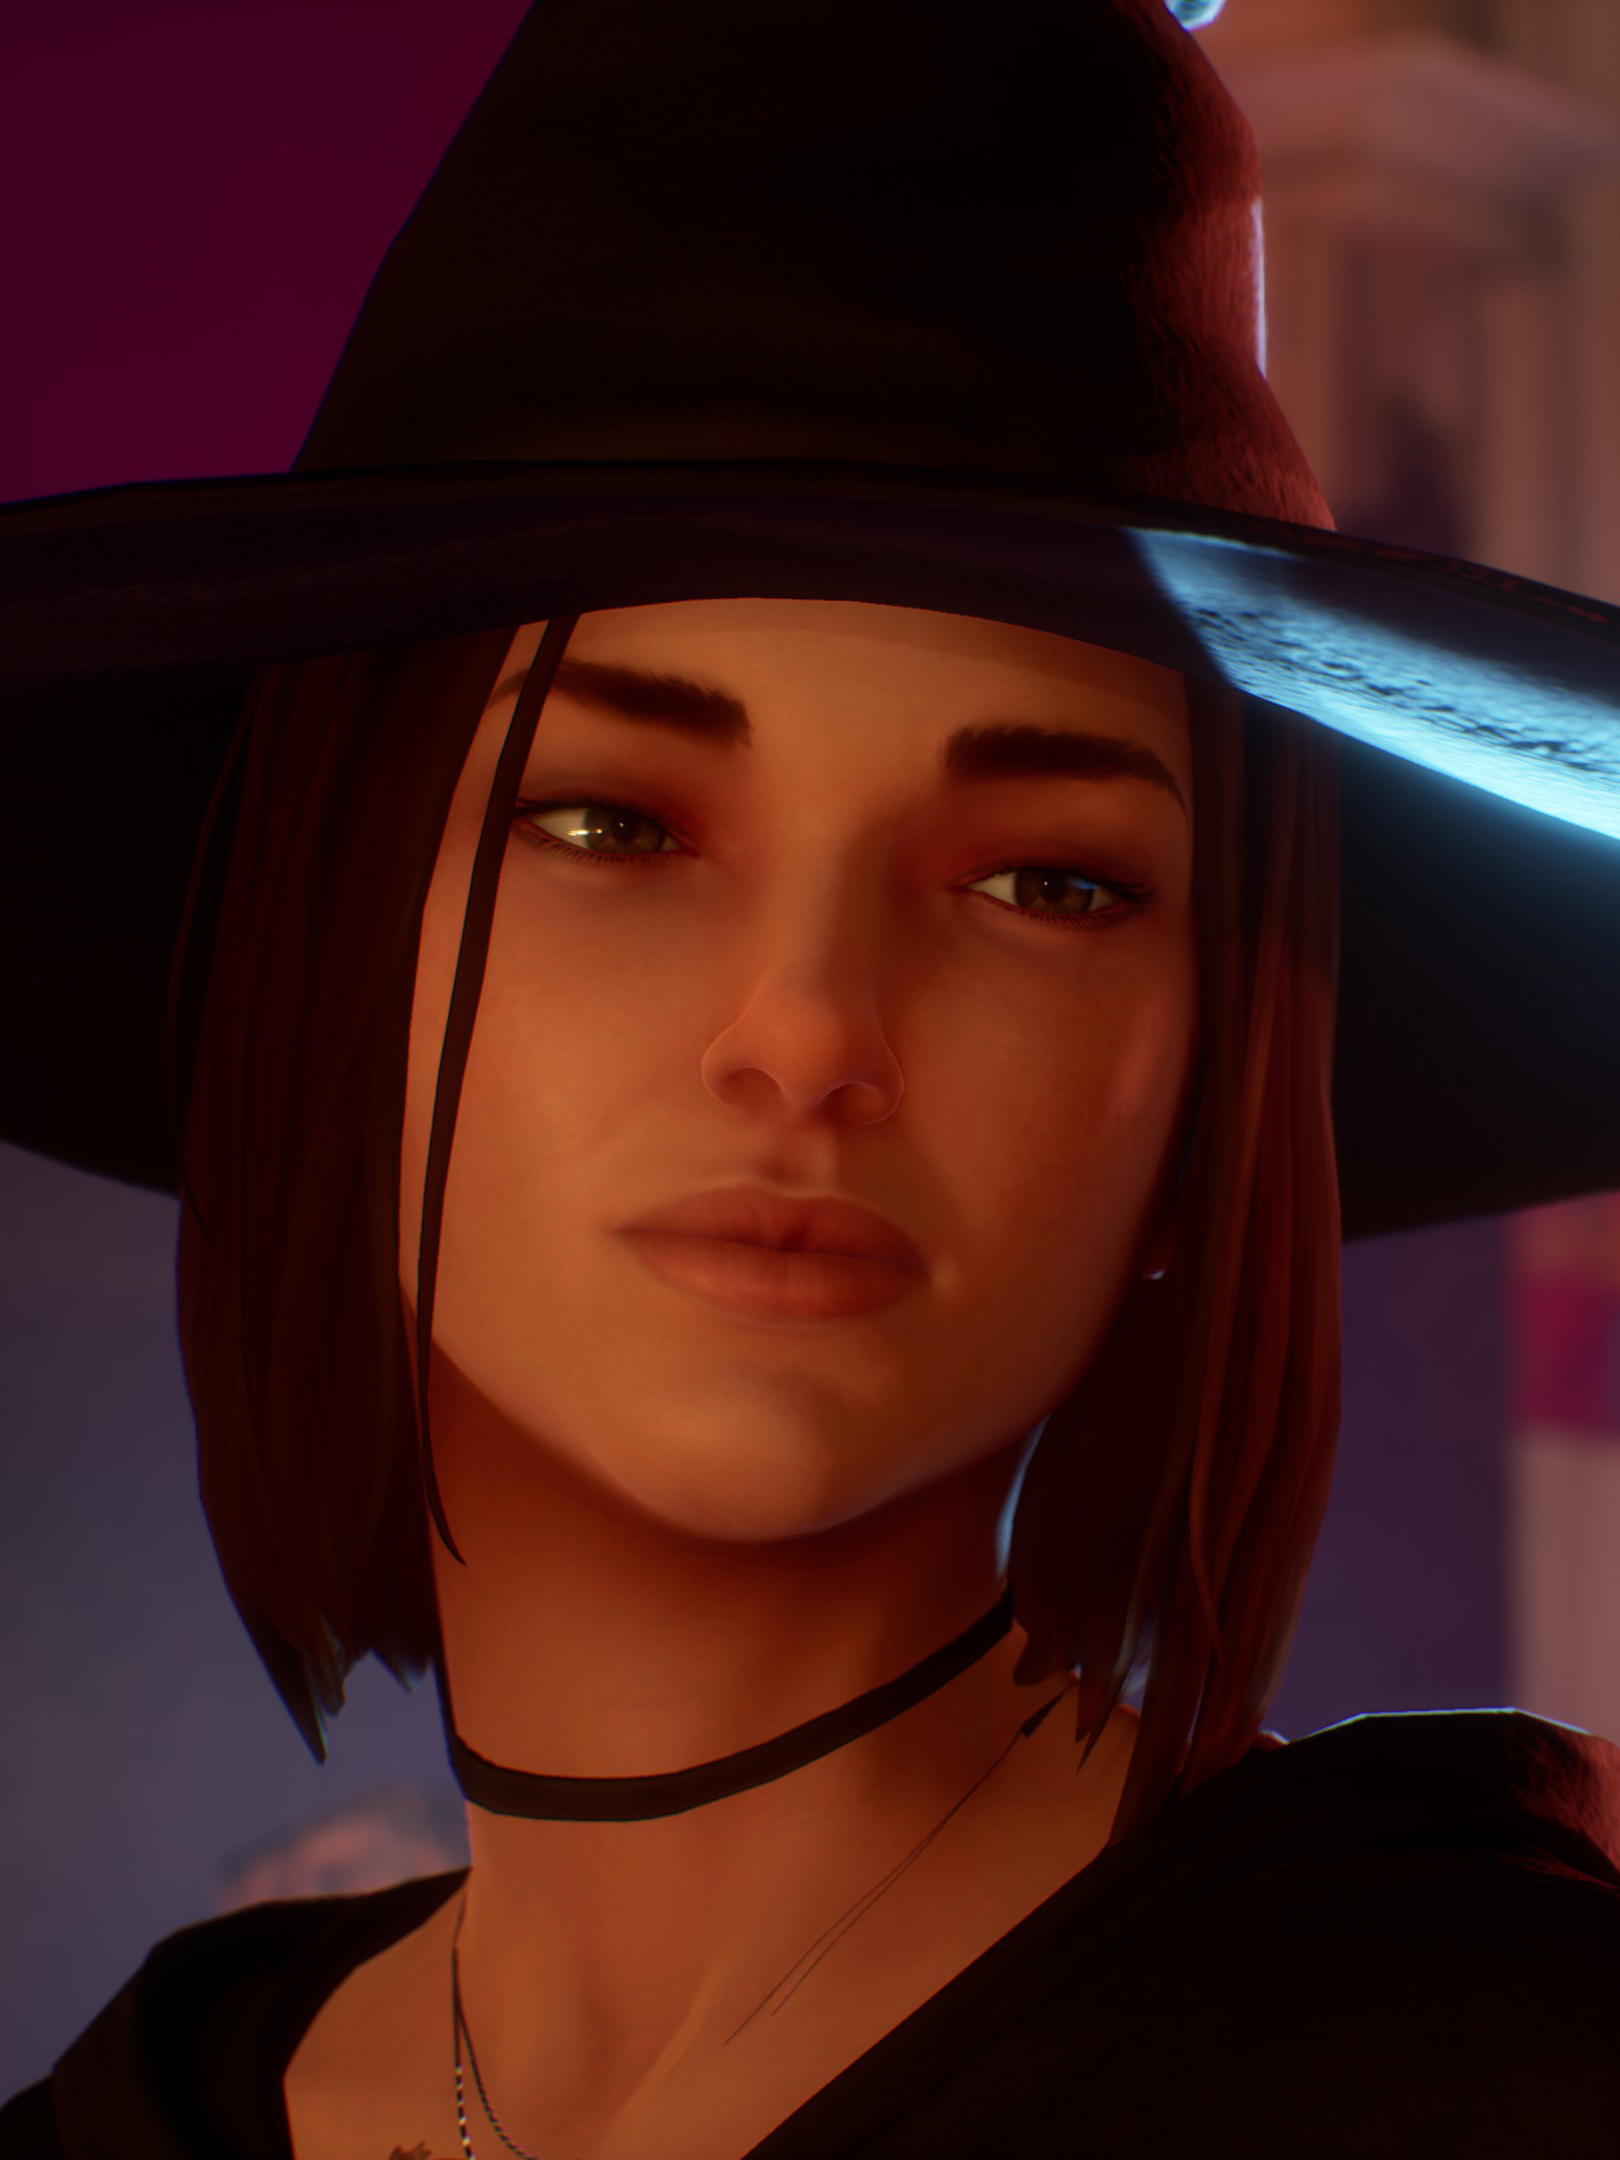 video game, life is strange: true colors, steph gingrich